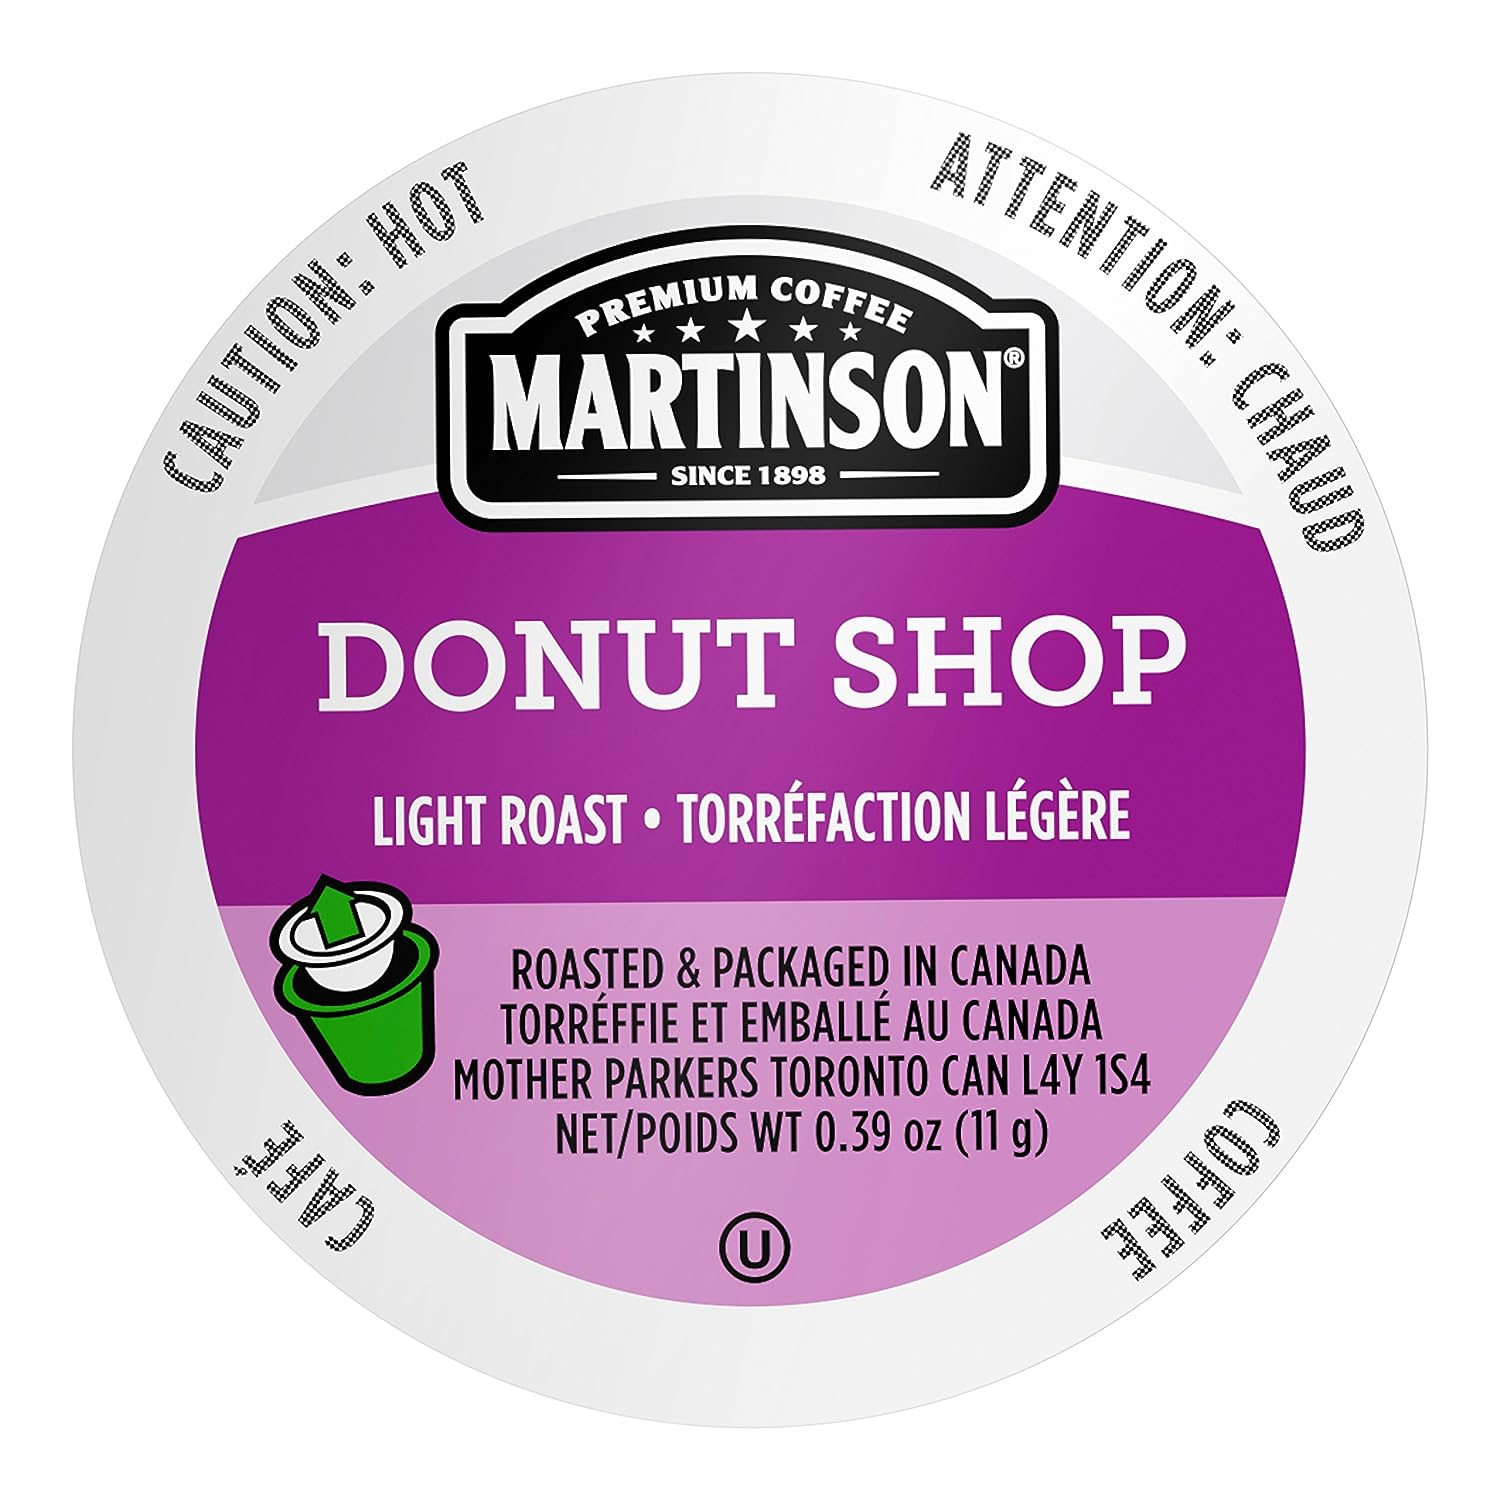 Martinson Single Serve Coffee Capsules, Donut Shop, Compatible with Keurig K-Cup Brewers, 48 Count